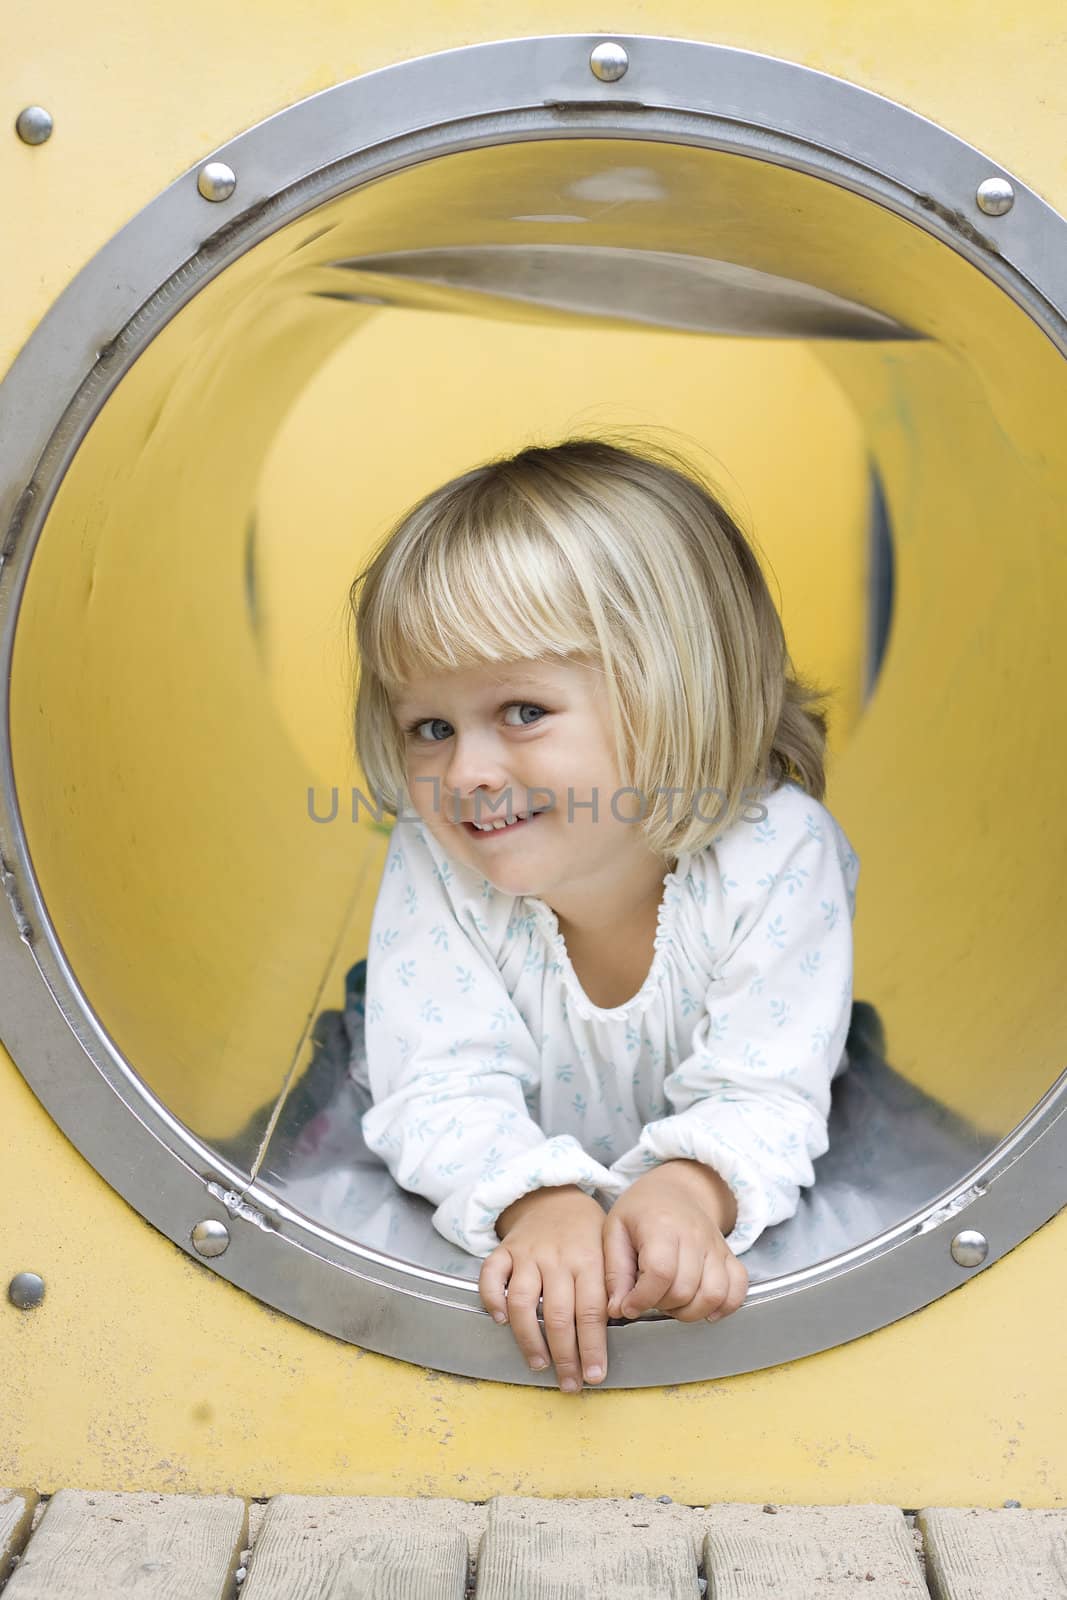 A cute little girl peeking out from a play ground tunnel, smiling at the camera. 